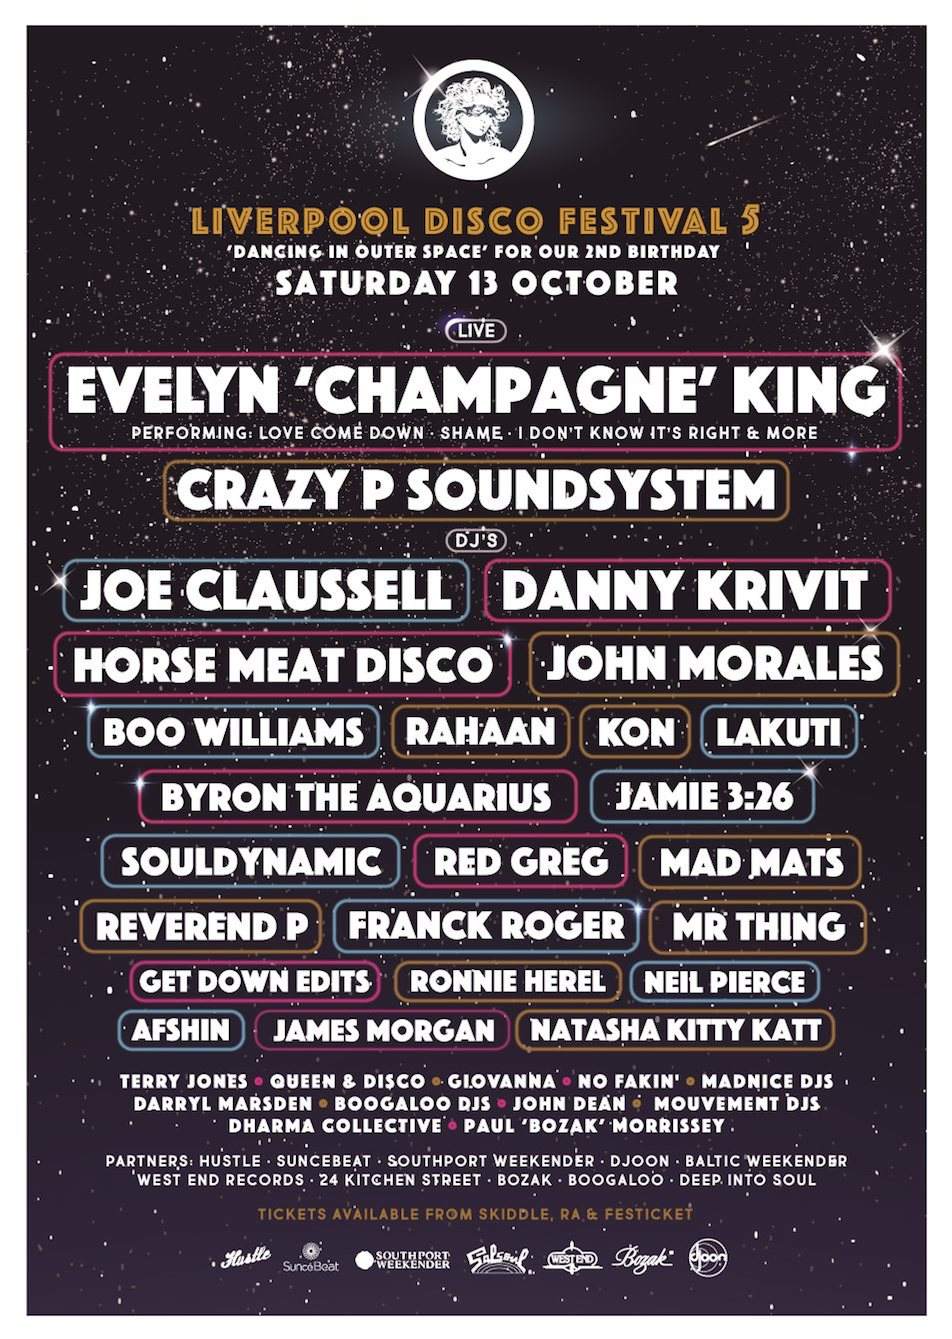 Evelyn "Champagne" King to perform live at Liverpool Disco Festival 2018 image